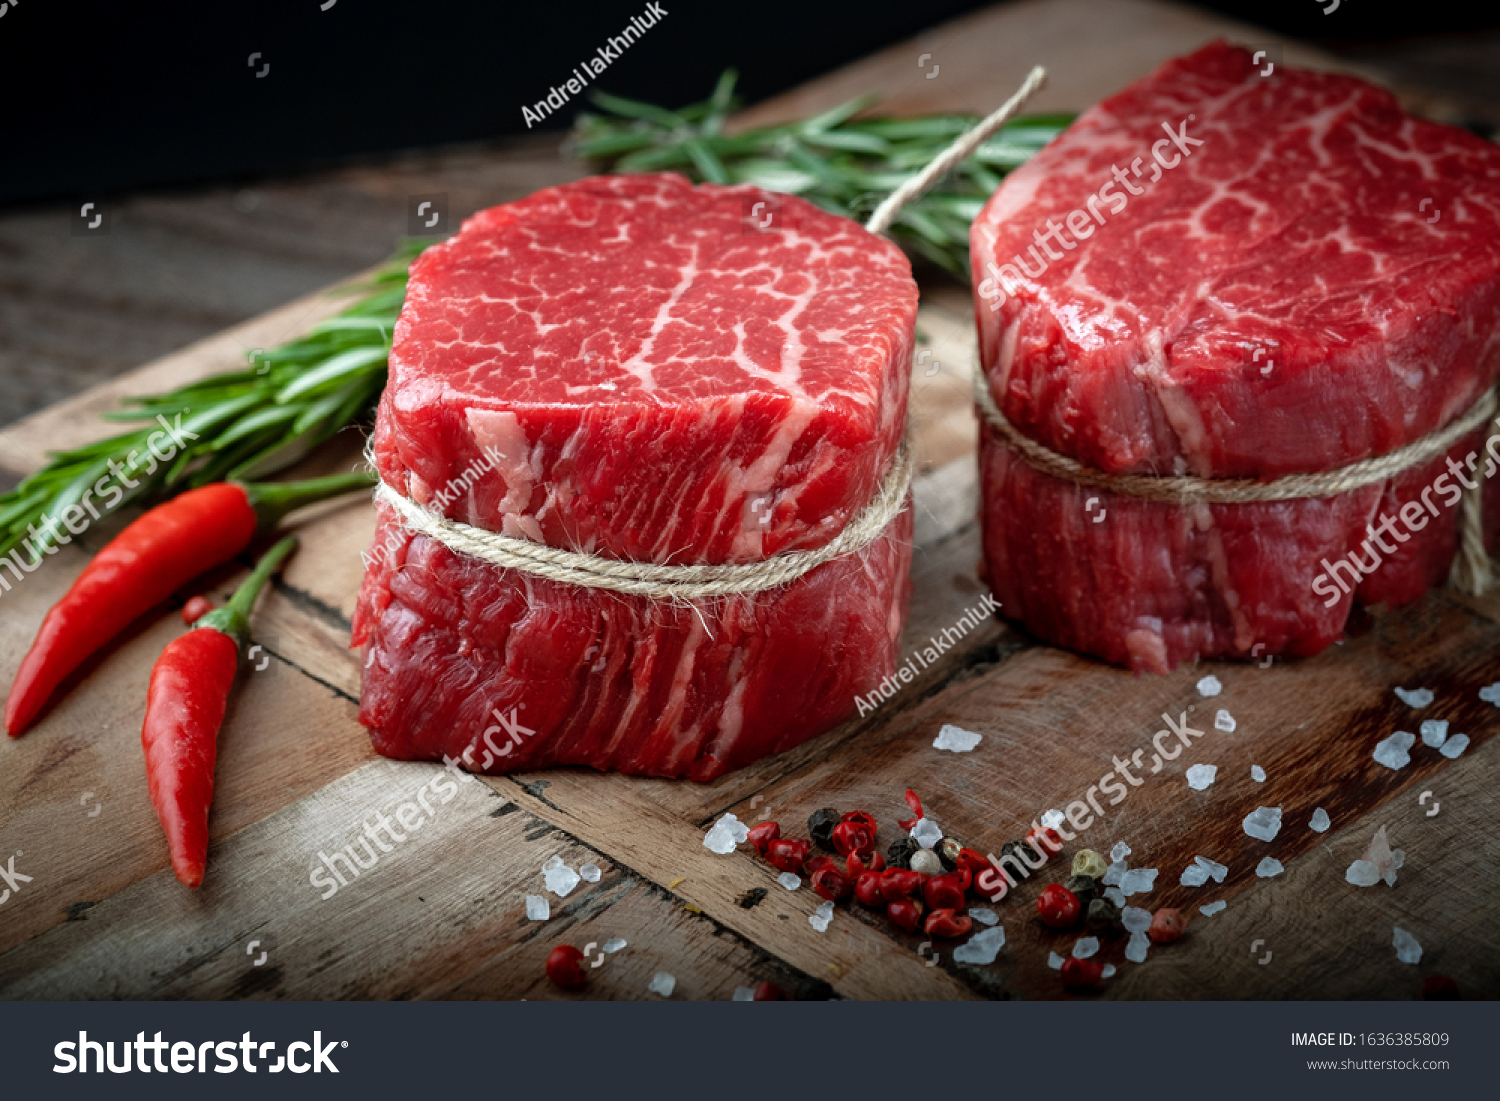 Raw beef filet Mignon steak on a wooden Board with pepper and salt, black Angus marbled meat #1636385809